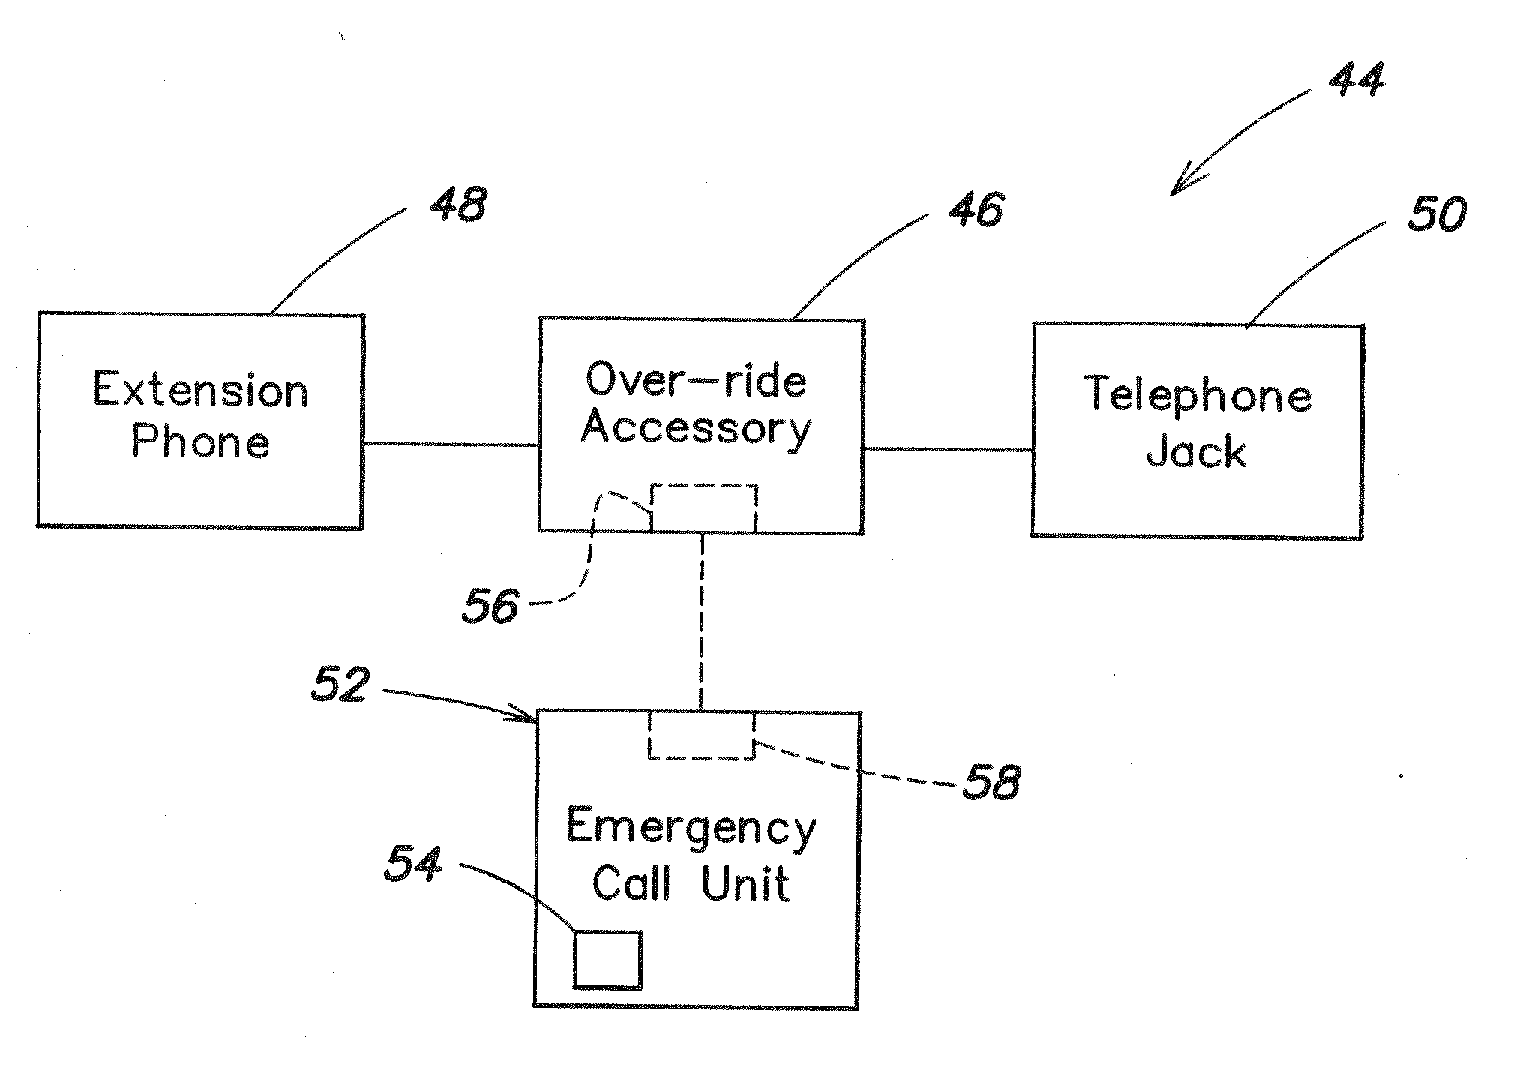 Speakerphone control techniques and emergency call systems